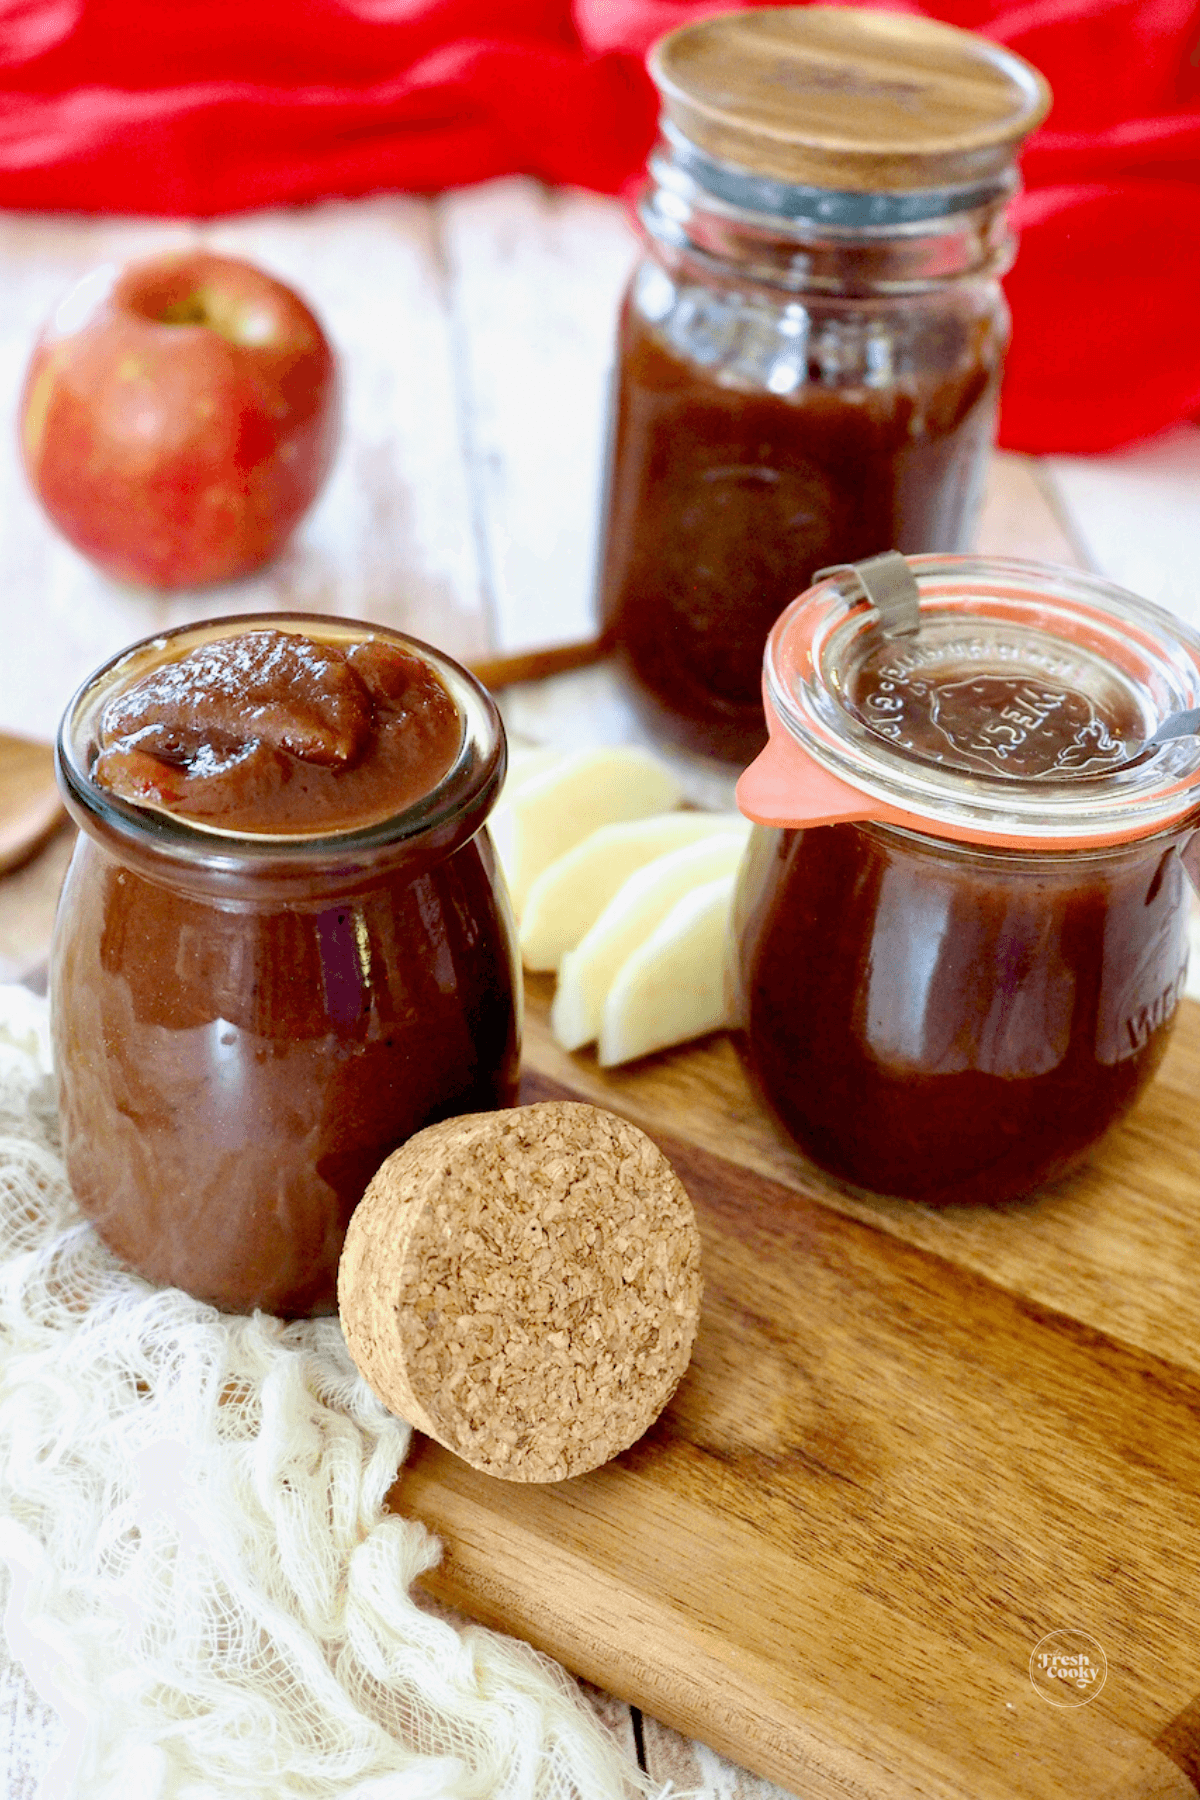 Apple butter spooned into jars.